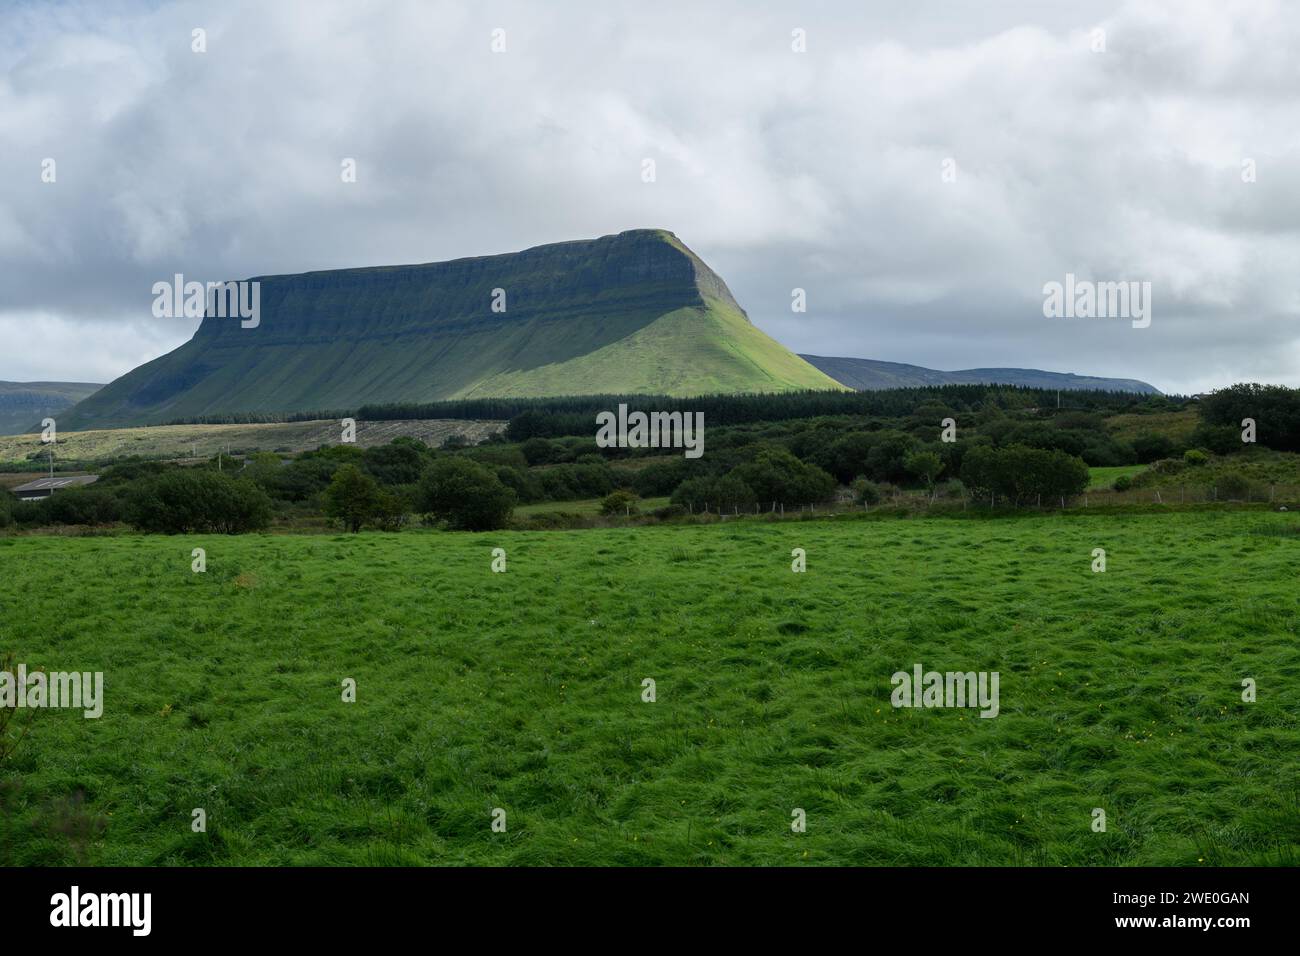 Typical natural landscape of the interior of Ireland on a day with clouds and green mountain in the background Stock Photo